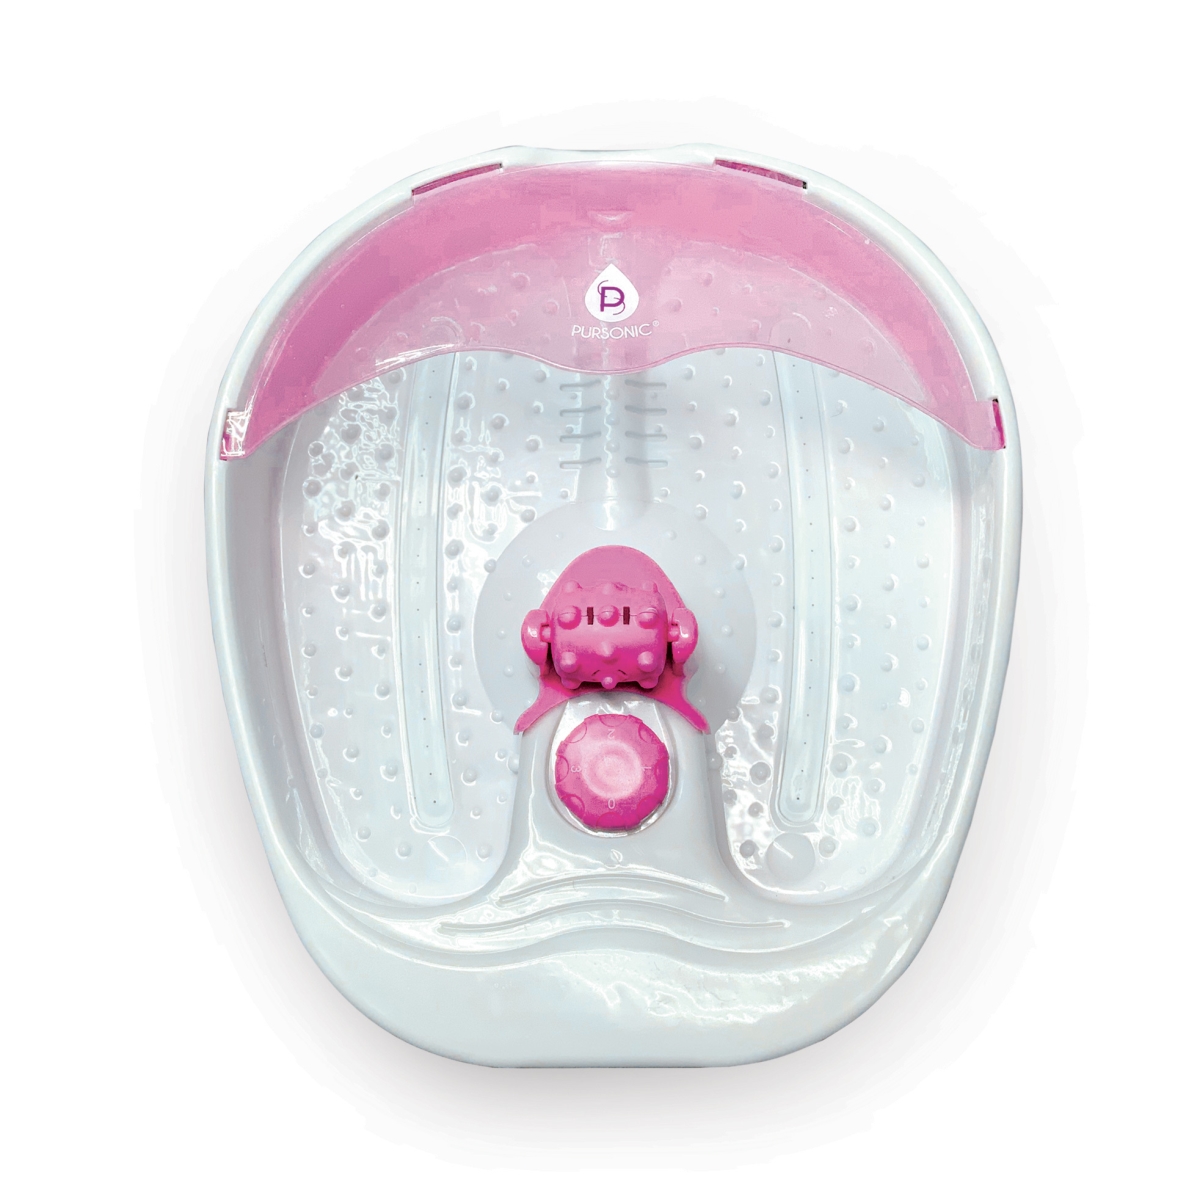 Picture of Pursonic HMG700PK Foot Spa Bath Massager with Tea Tree Oil Foot Salts, Pink